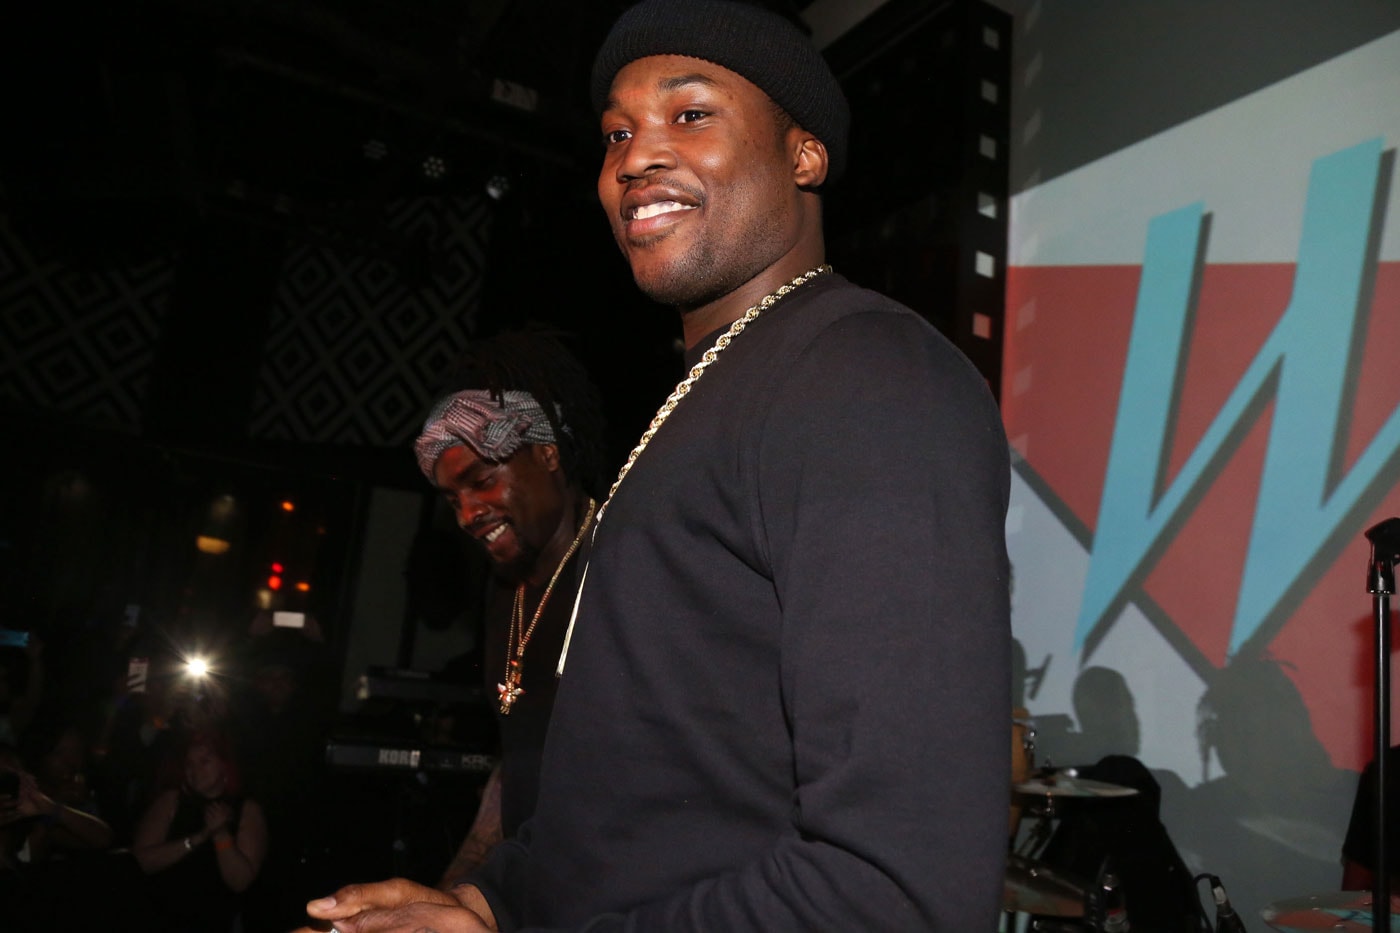 Meek Mill Performs a New Drake Diss Track on 'The Prinkprint' Tour